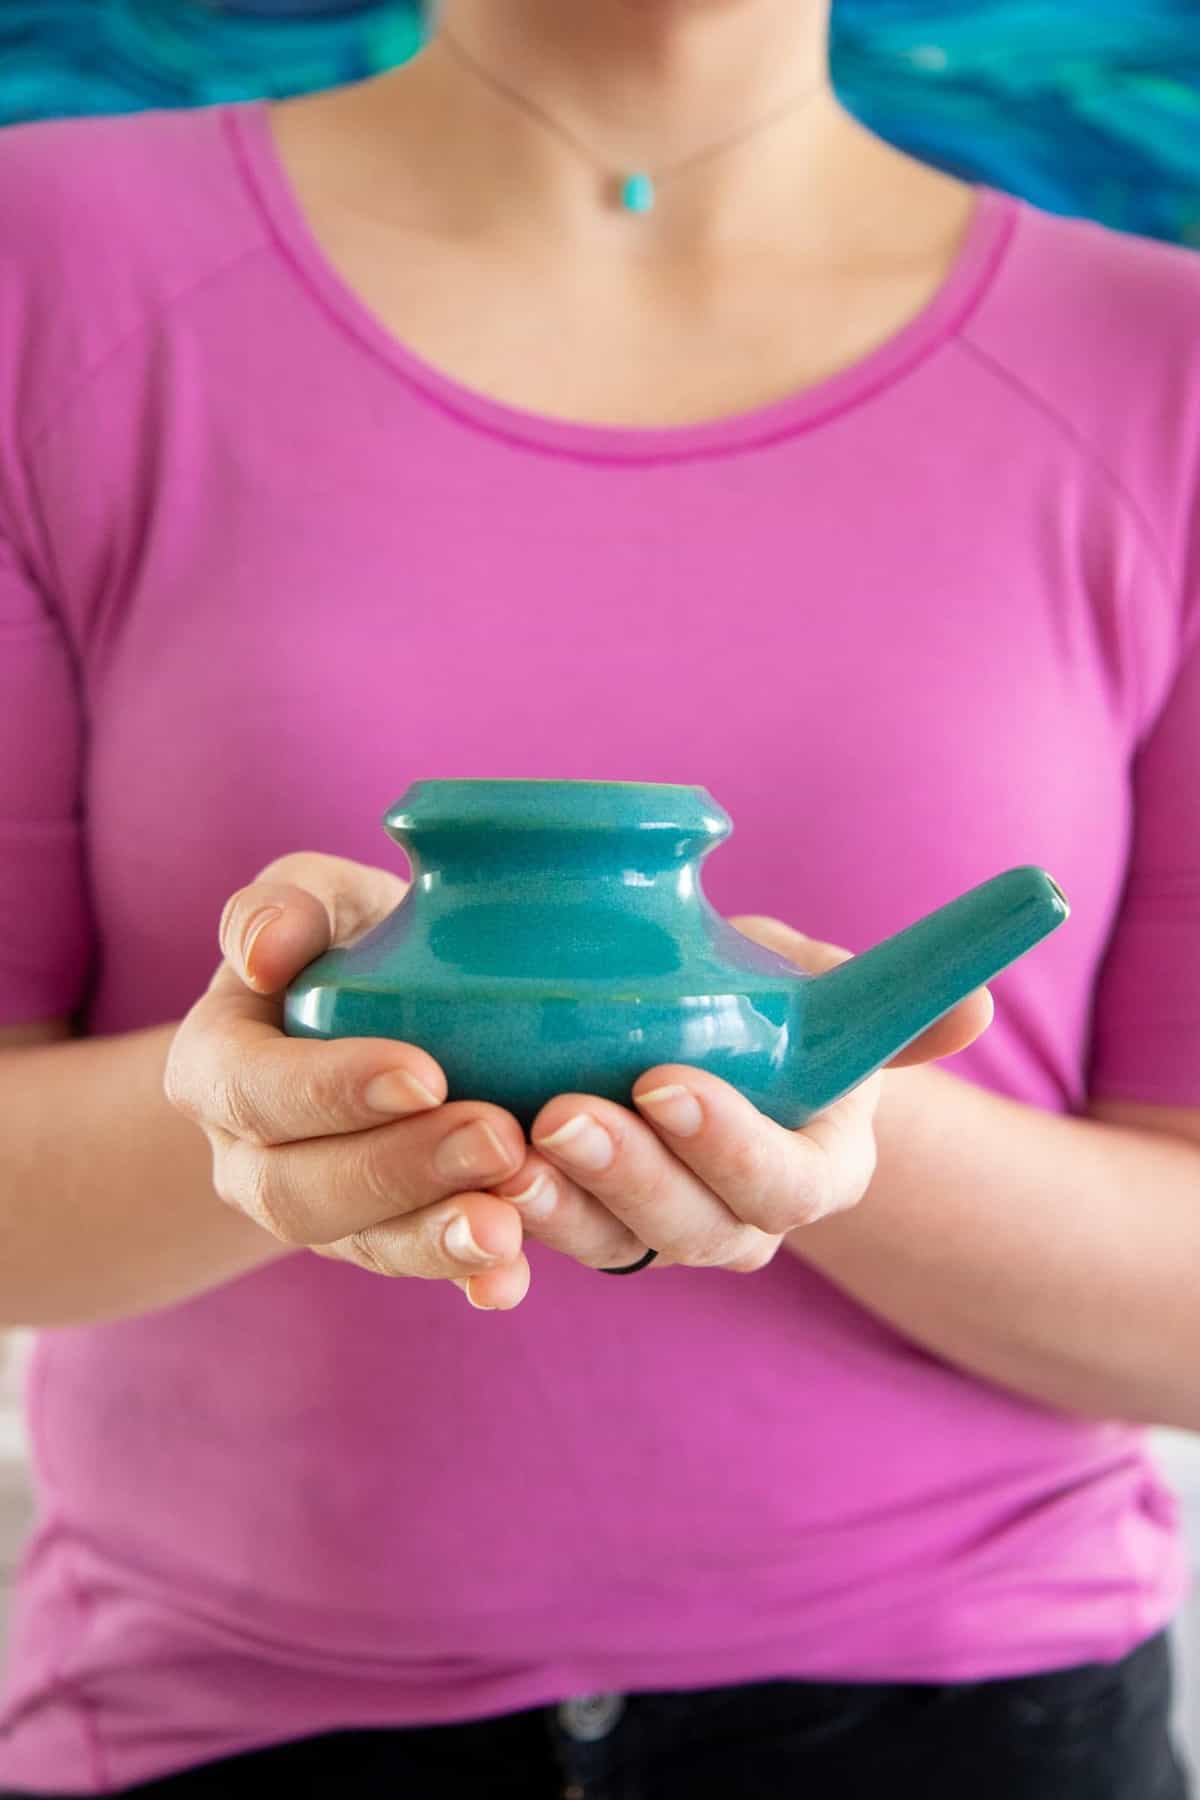 Two hands holding a ceramic neti pot